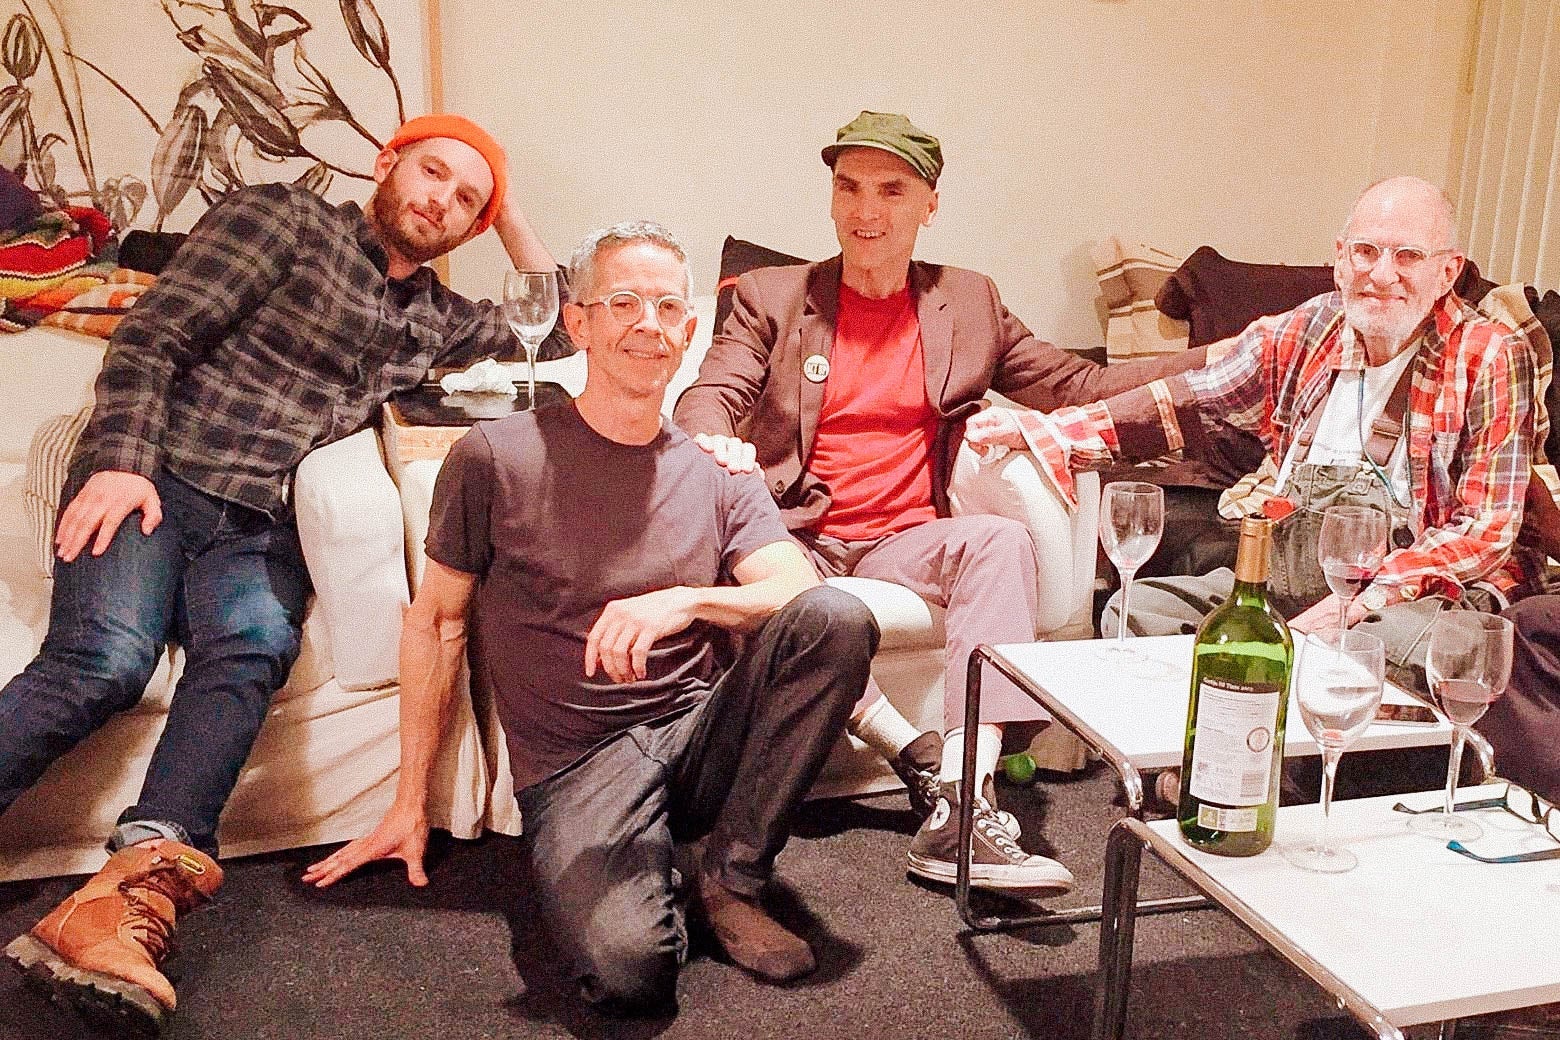 Four men pose together on sofas and chairs in a living room with a wine bottle and wine glasses on a nearby coffee table.